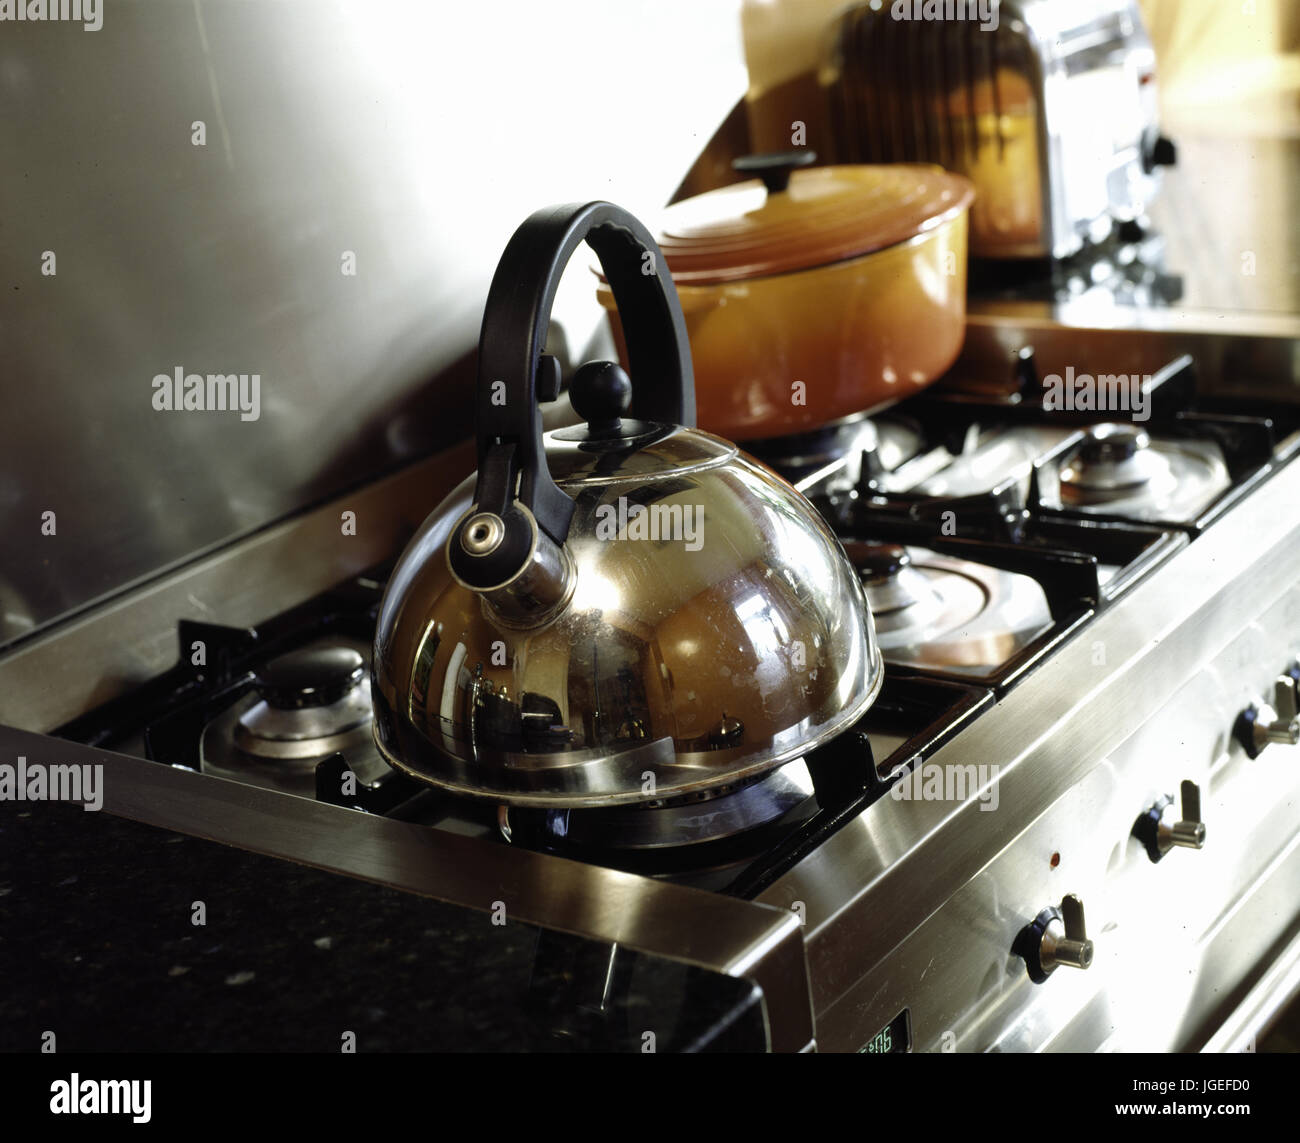 Closeup of kettle on gas hob Stock Photo